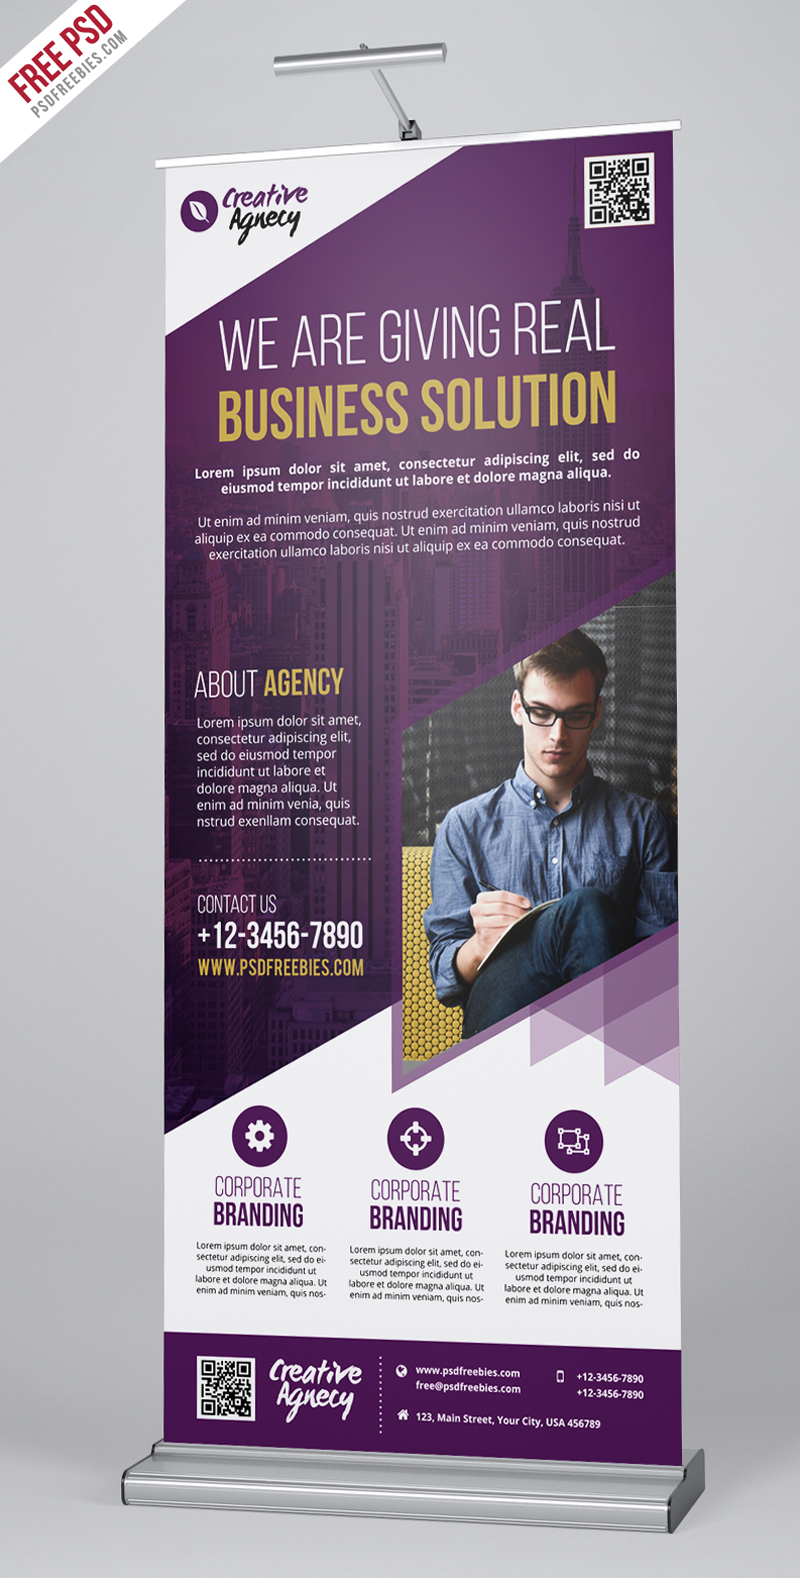 Creative Agency Roll Up Banner PSD Template PSDFreebies com